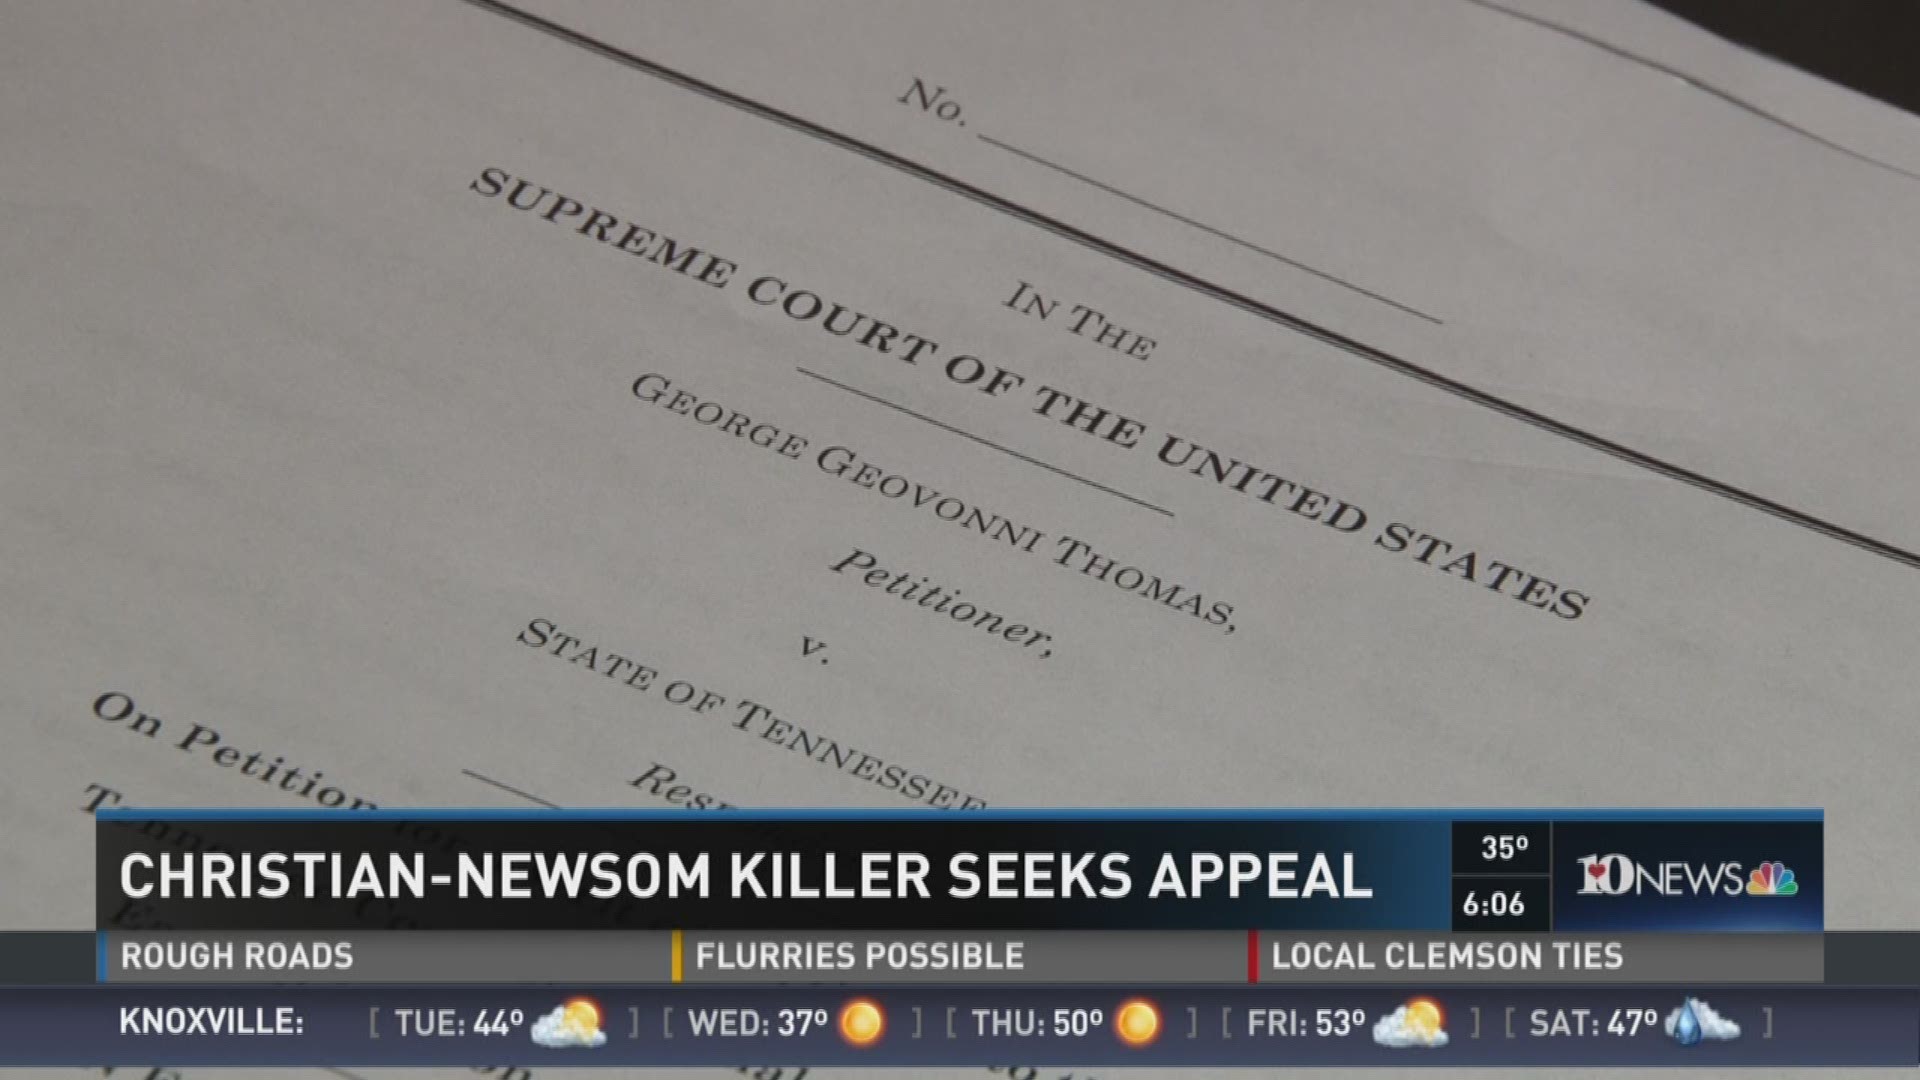 George Thomas, convicted in the Christian-Newsom torture-slayings, is seeking an appeal with the US Supreme Court. Jan. 11, 2016